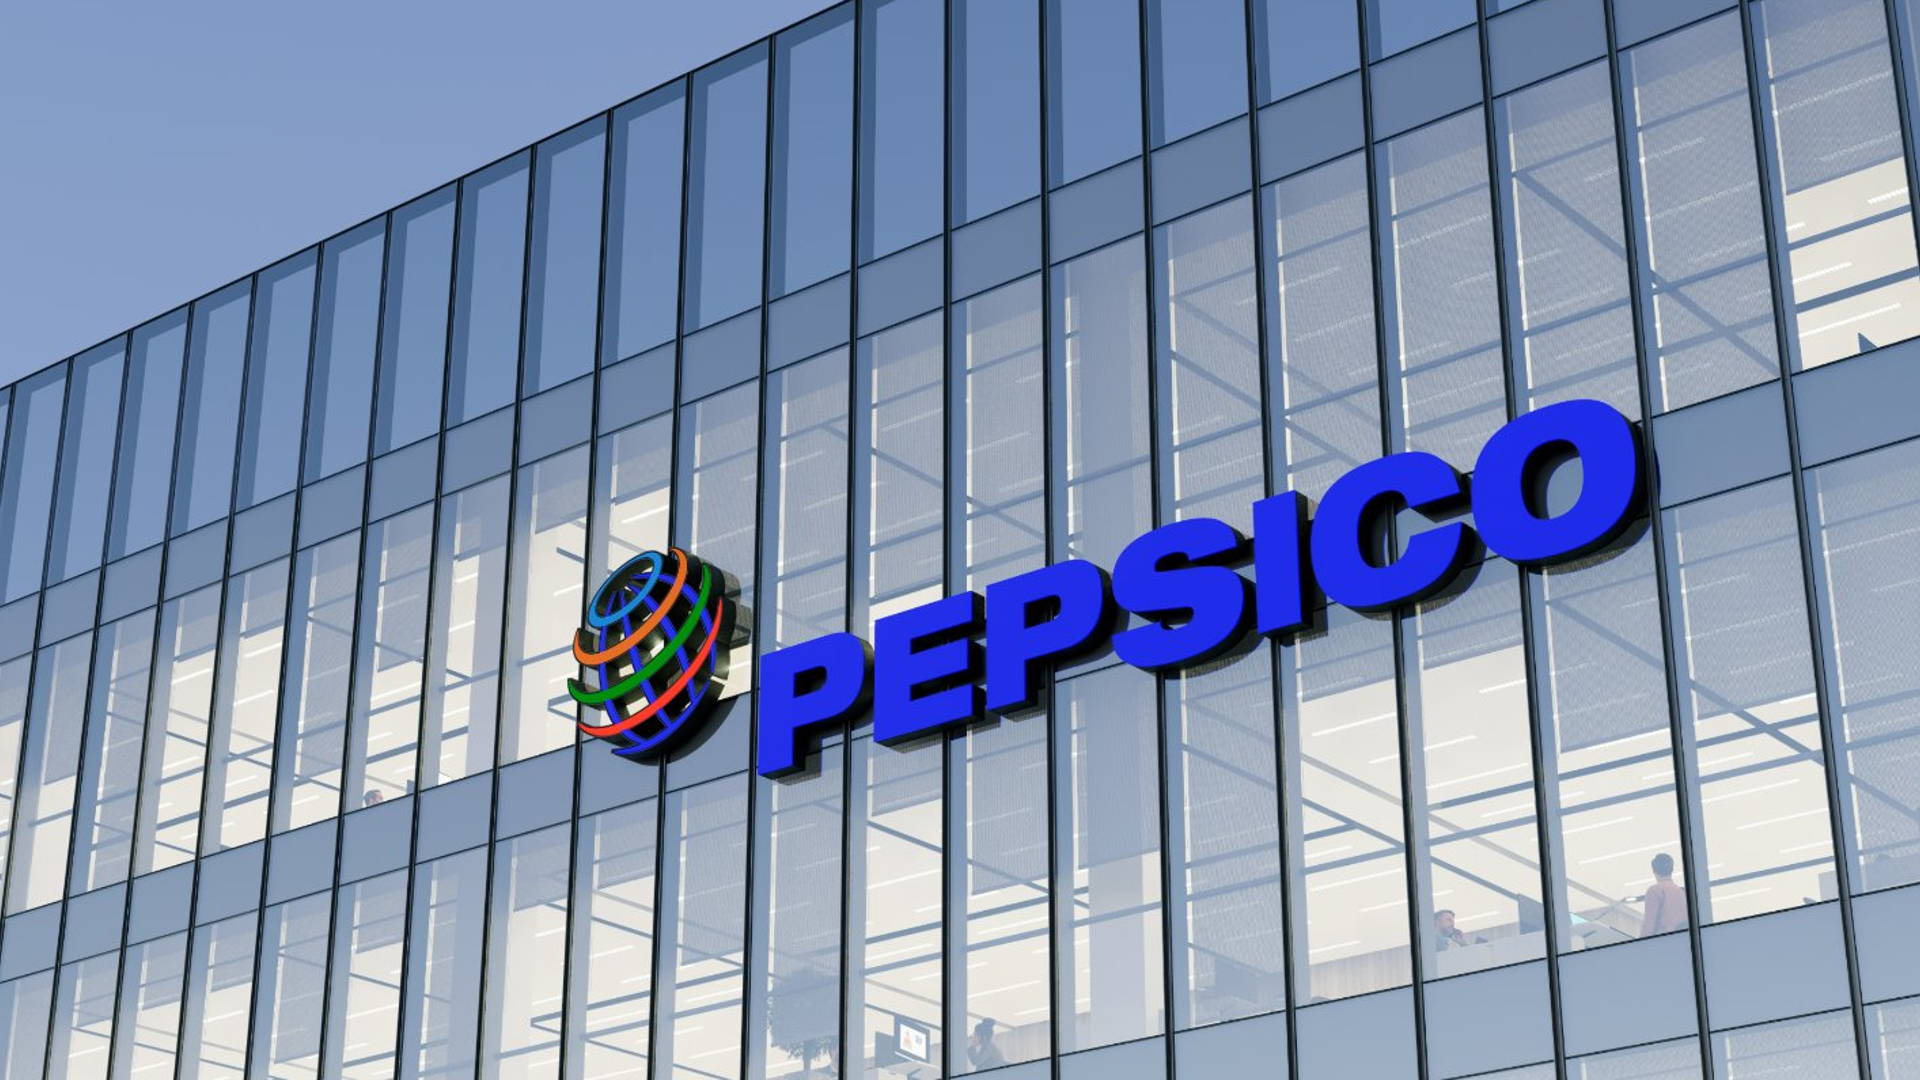 Featured image for PepsiCo Sued by New York Attorney General Letitia James Over Plastic Pollution in Buffalo River